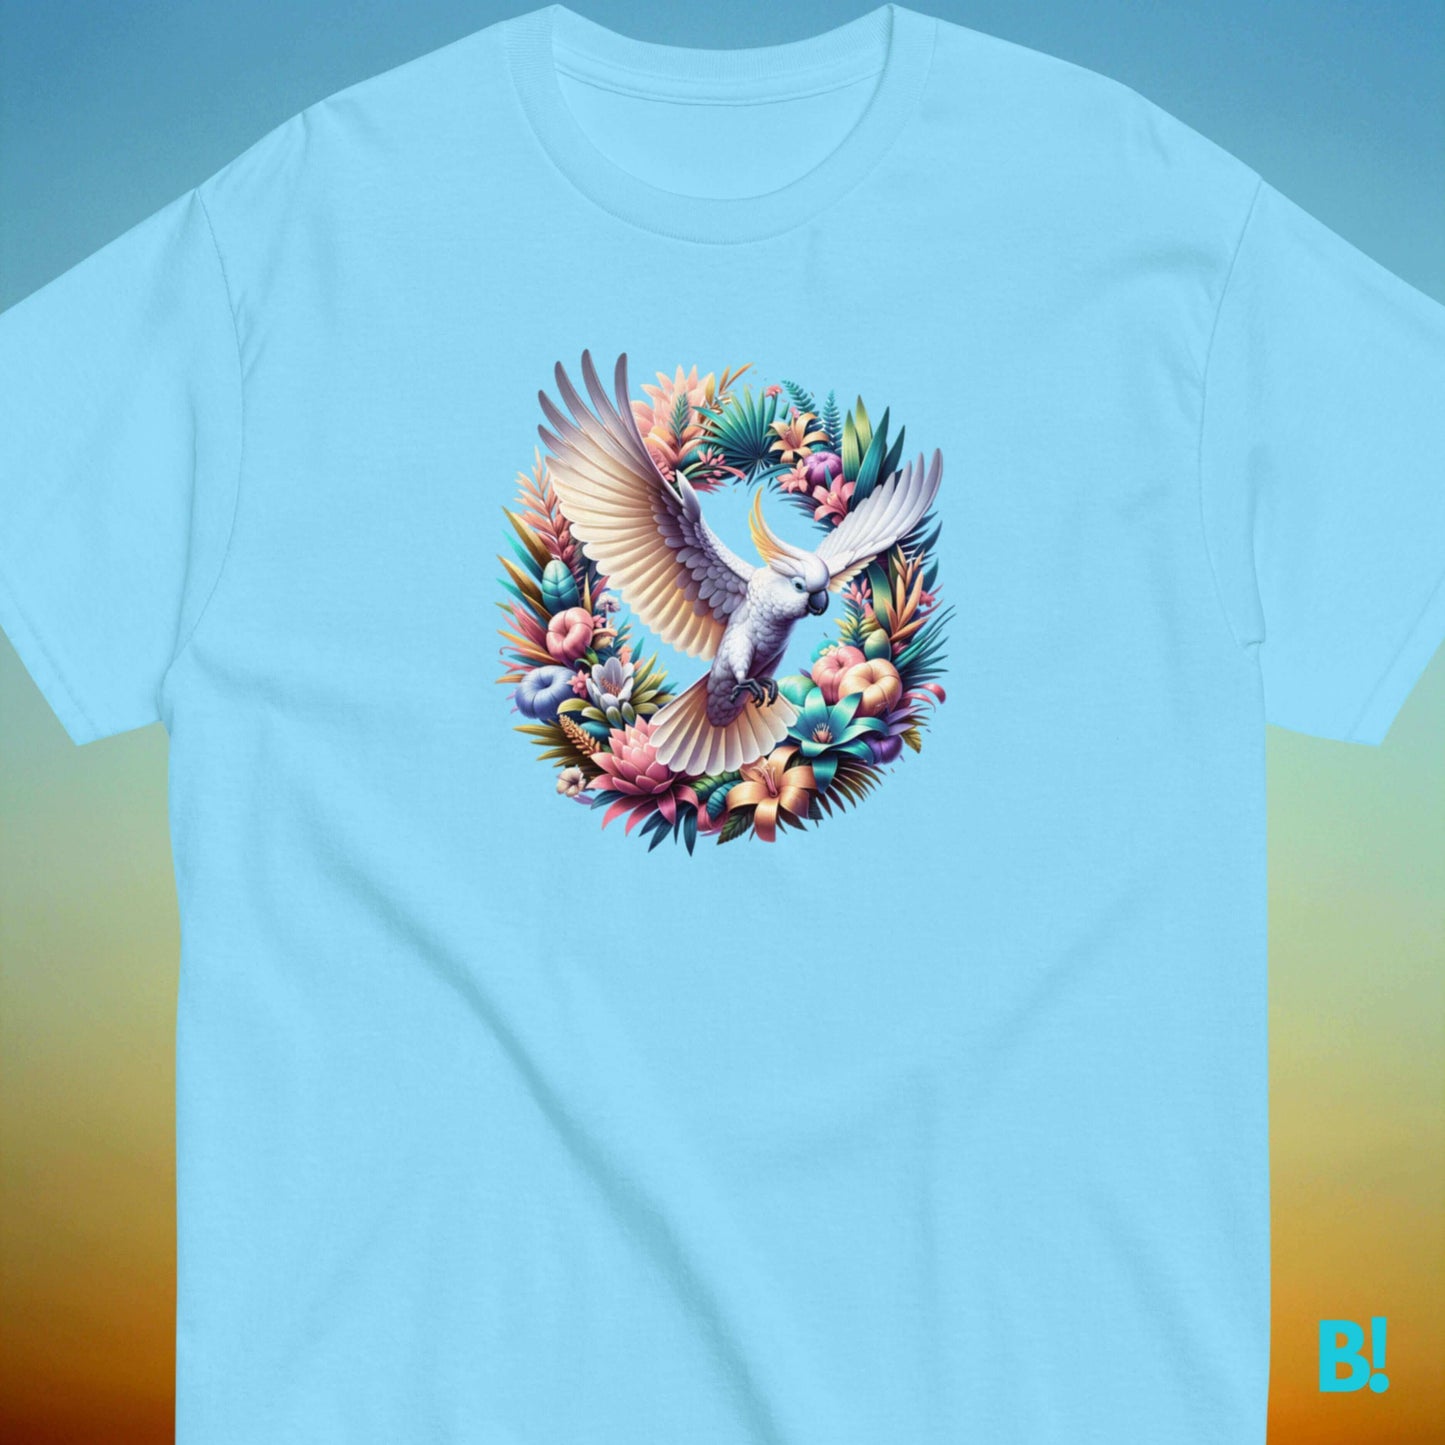 Exotic Cockatoo T-Shirt - Shop Now | Sizes S-XXXL Elevate your style with our Cockatoo T-Shirt! Perfect blend of comfort & exotic charm, available in 6 colors, sizes S-XXXL. Dive into tropical bliss today. €29.50 B!NKY Comfywear